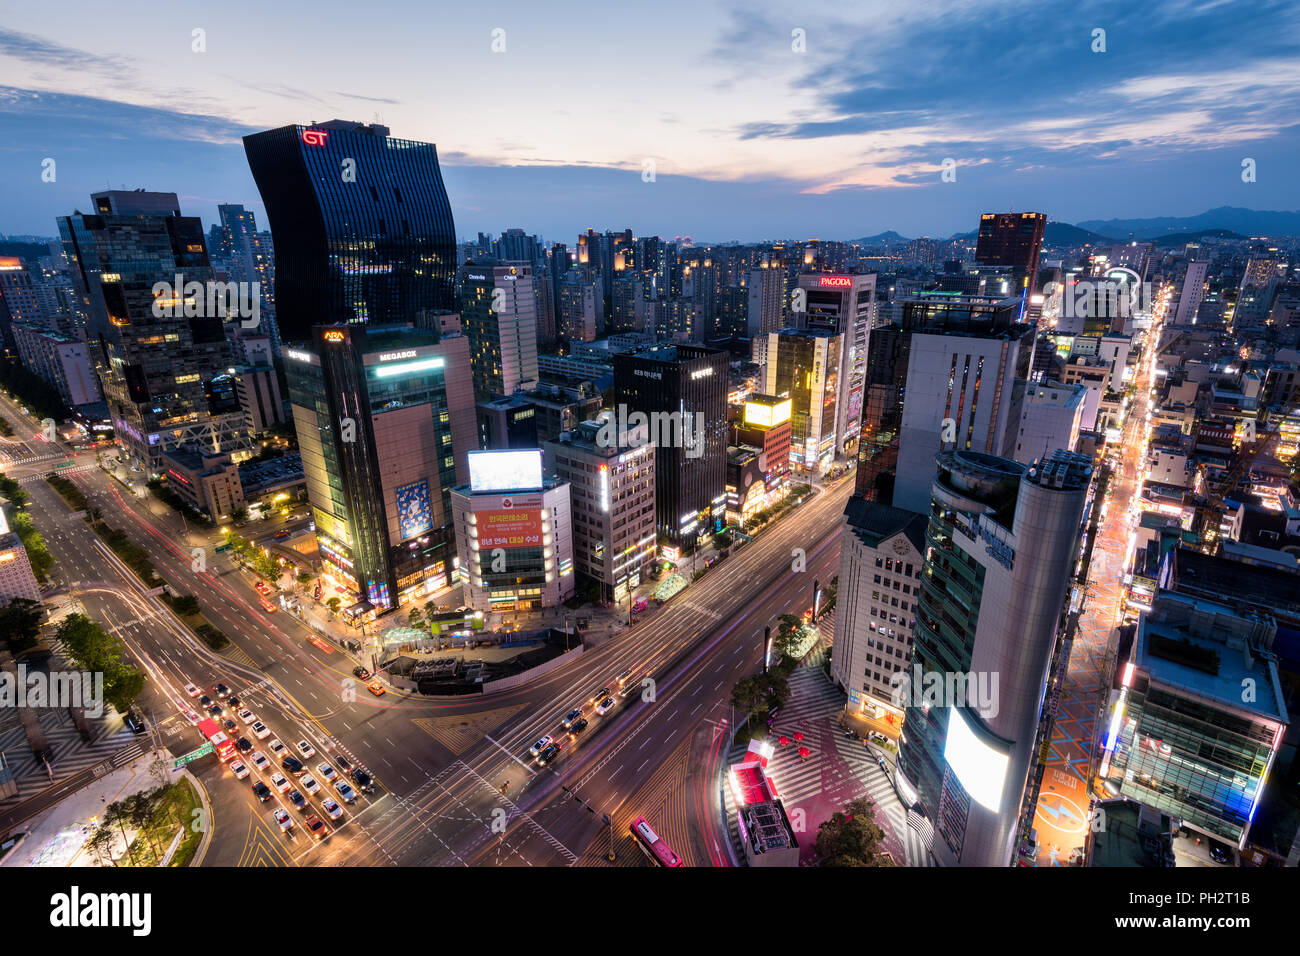 Night view of Gangnam district in Seoul city. Stock Photo